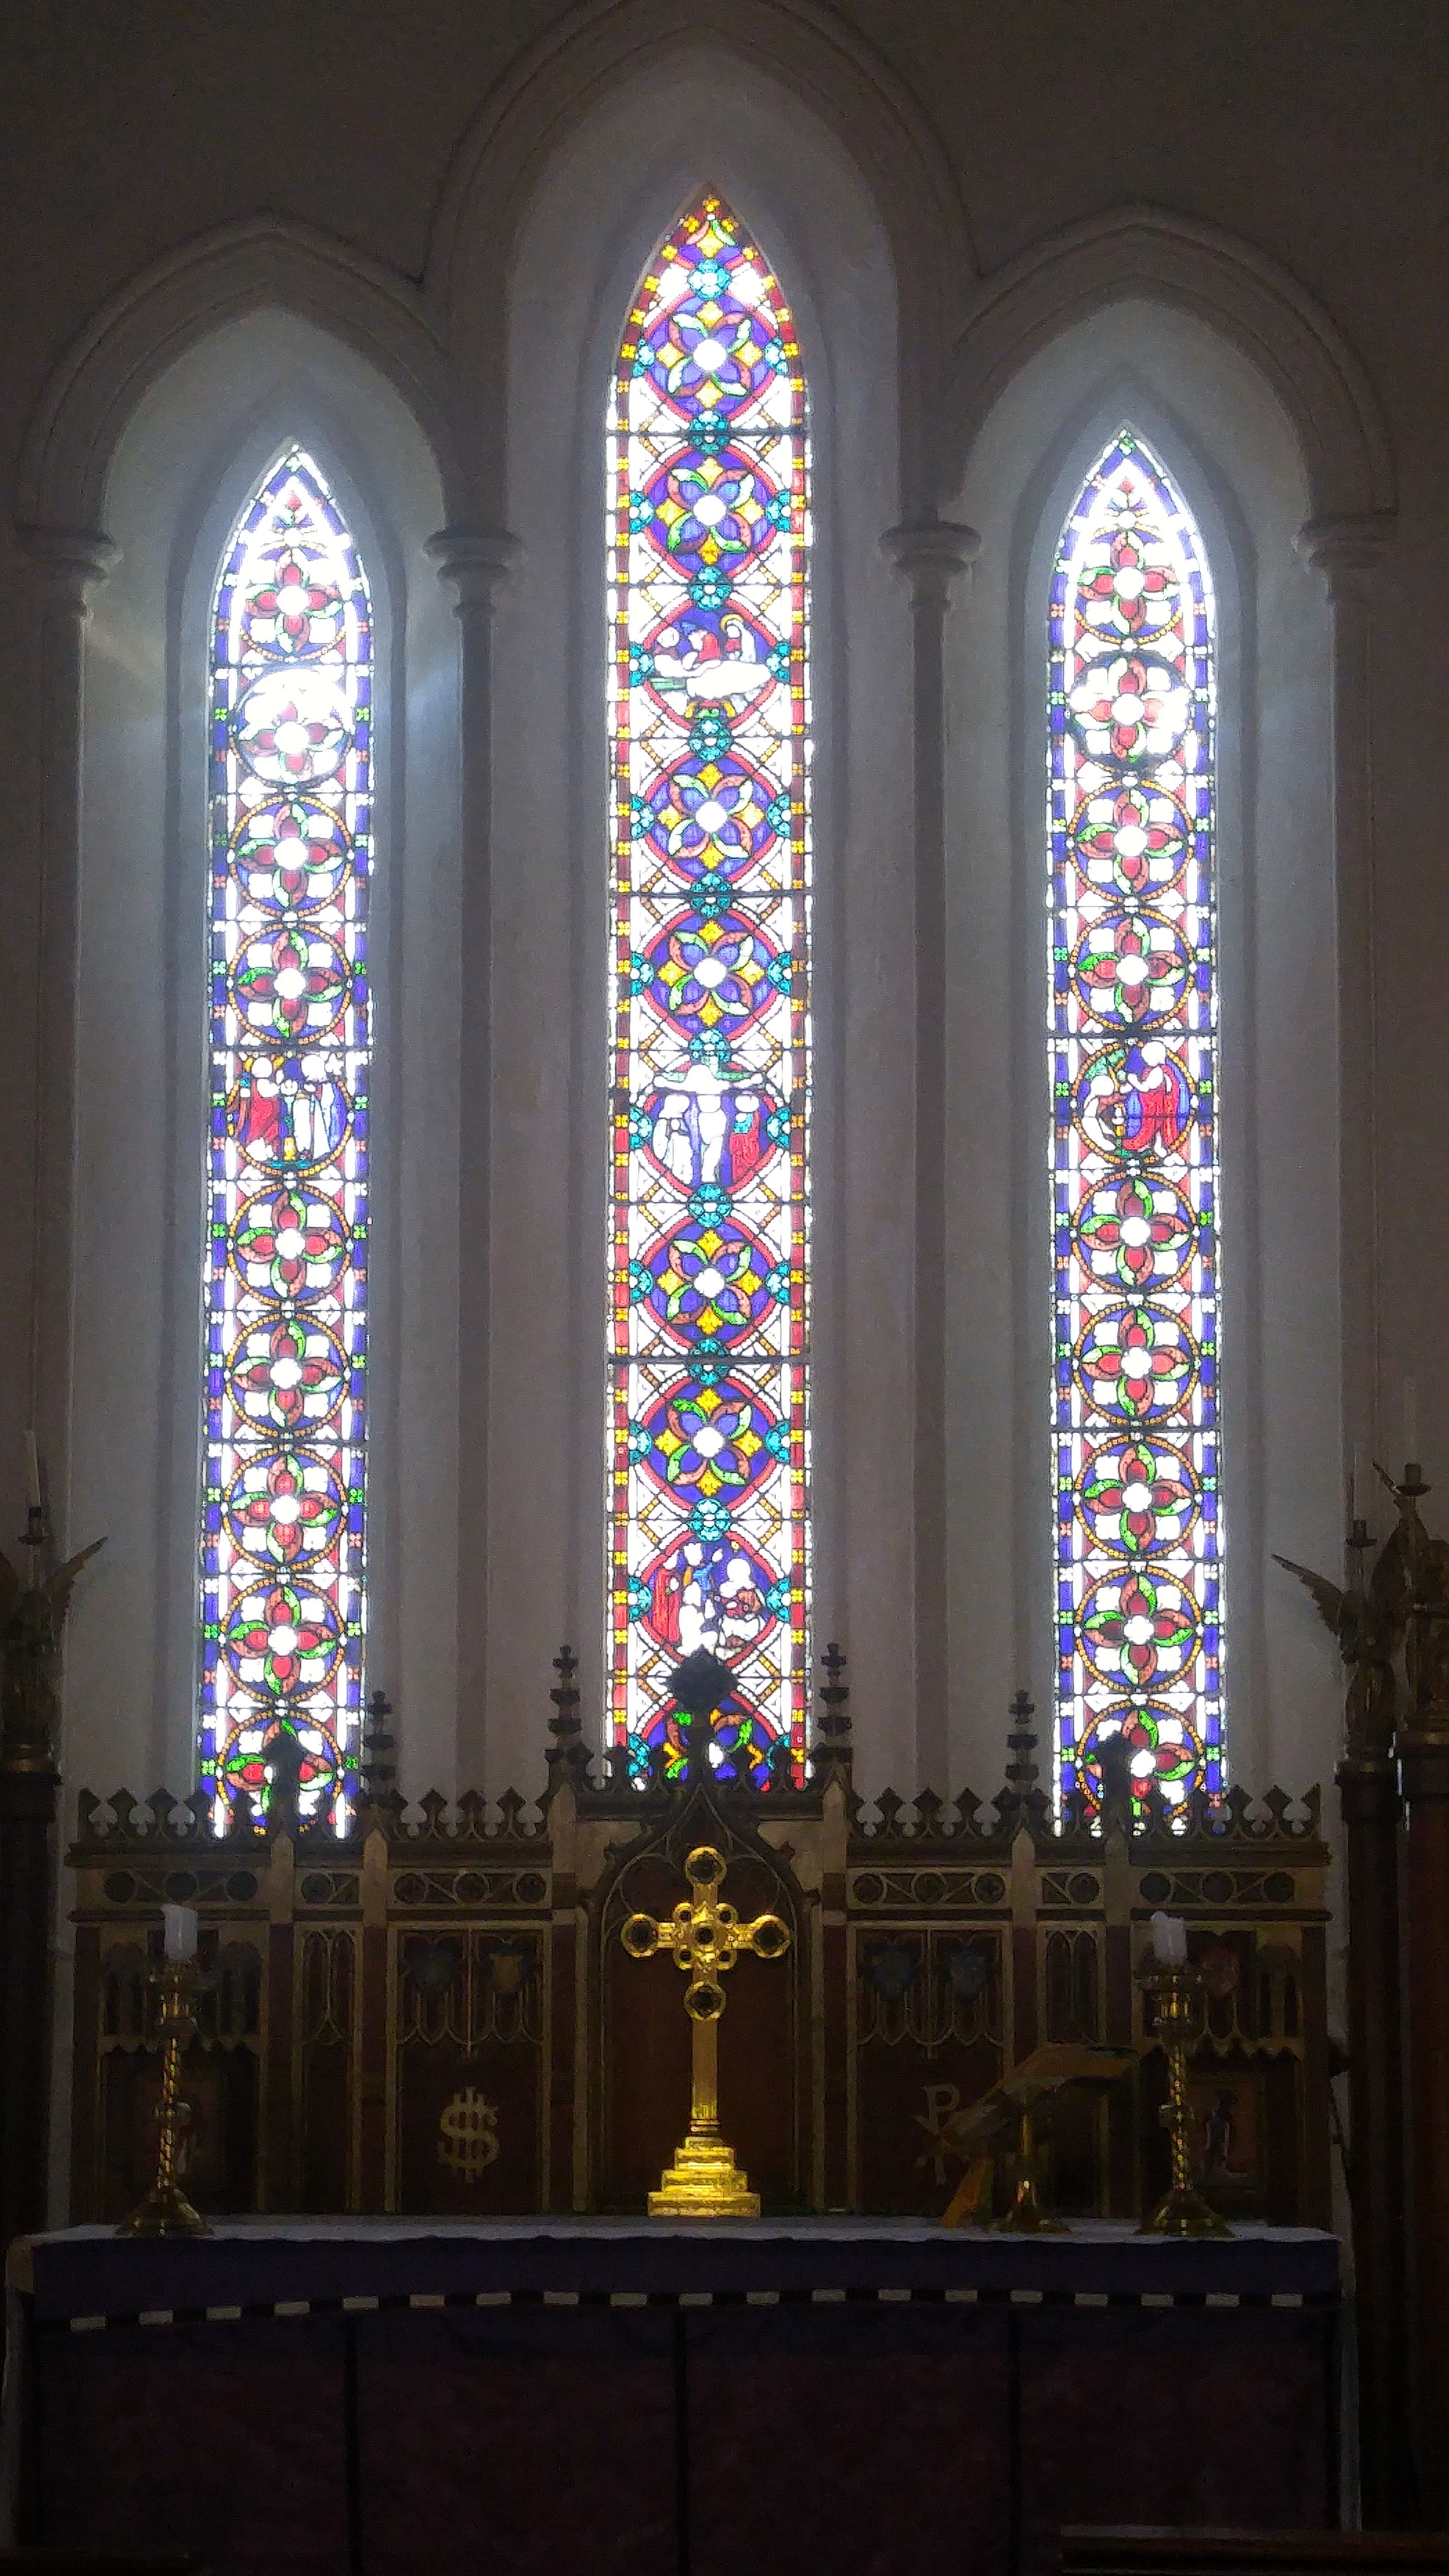 File Stained Glass Window And Altar Of Saint Paul S Cathedral In Saint Helena Jpg Wikimedia Commons